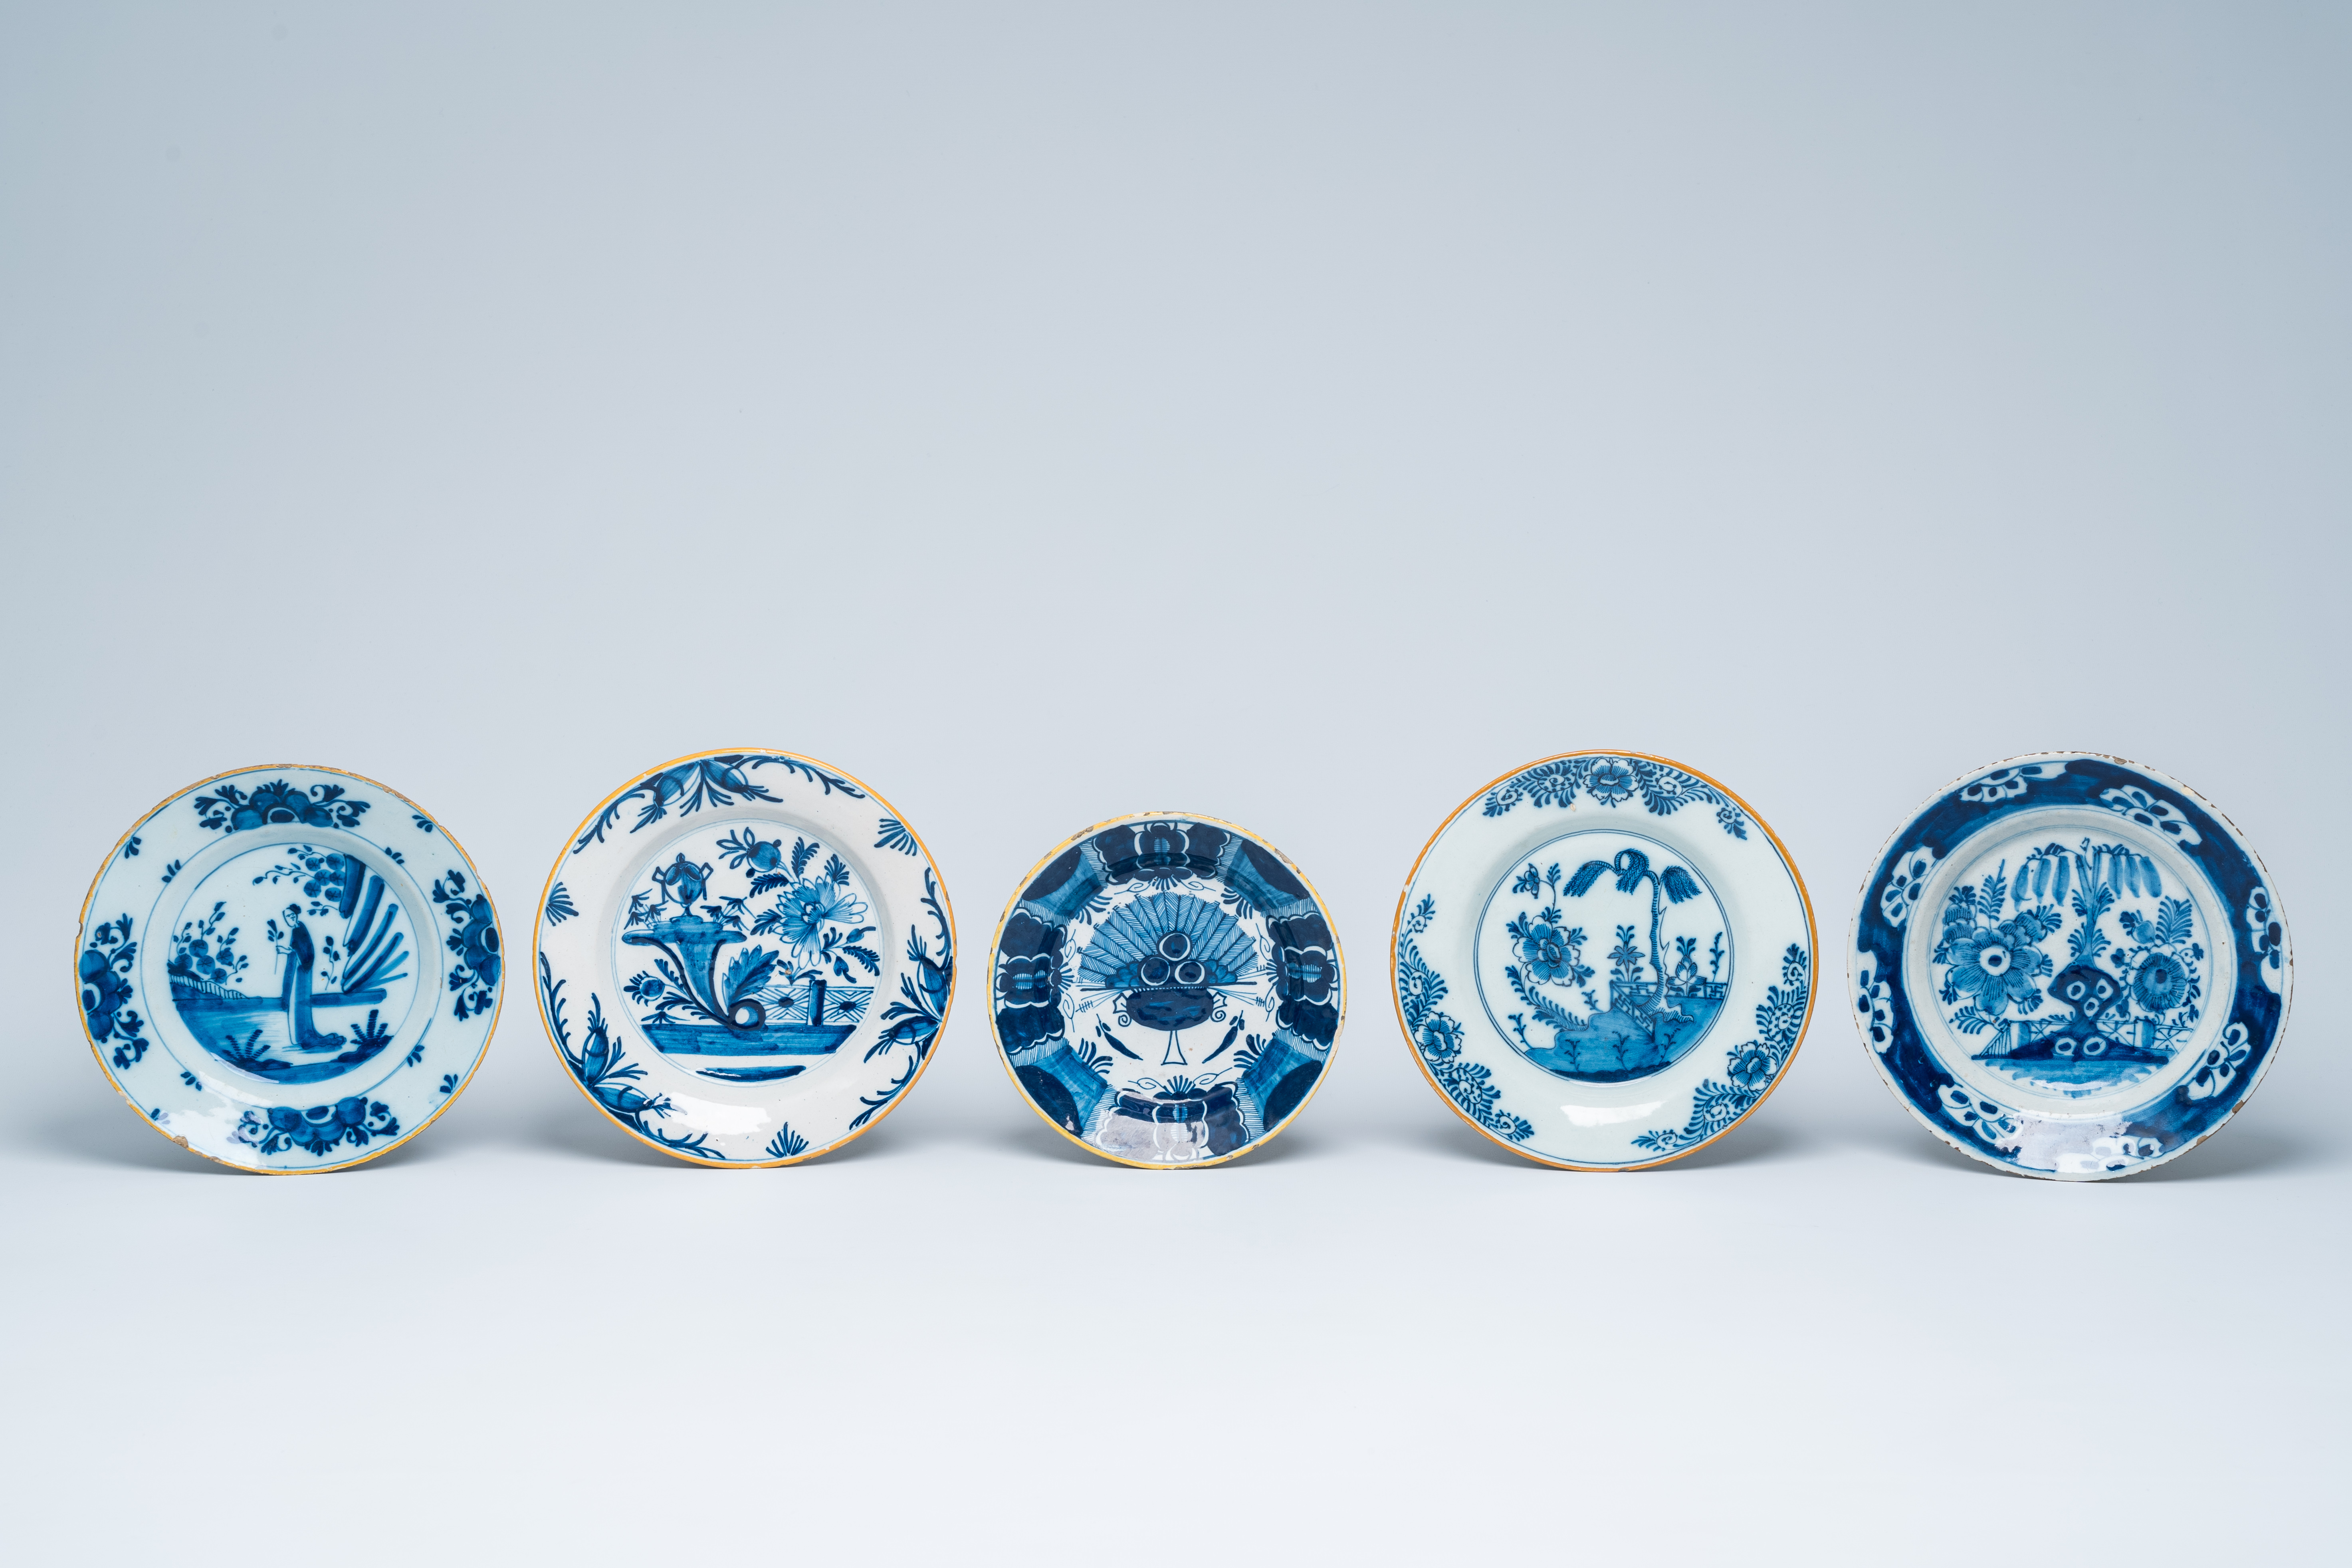 15 various blue, white and polychrome Dutch Delft plates, 18th C. - Image 4 of 7